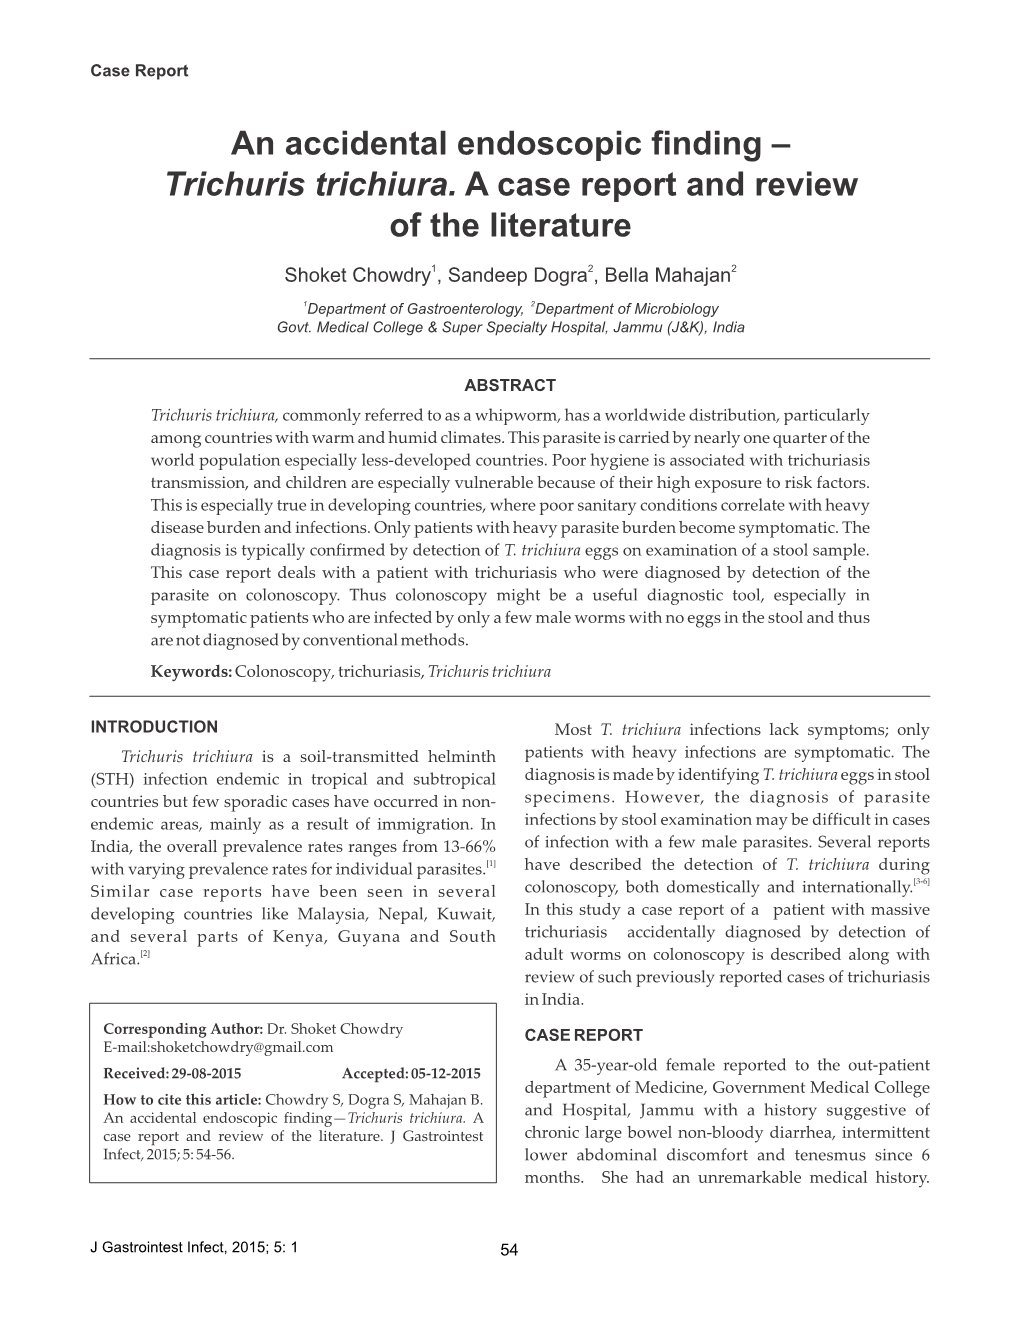 Trichuris Trichiura. a Case Report and Review of the Literature